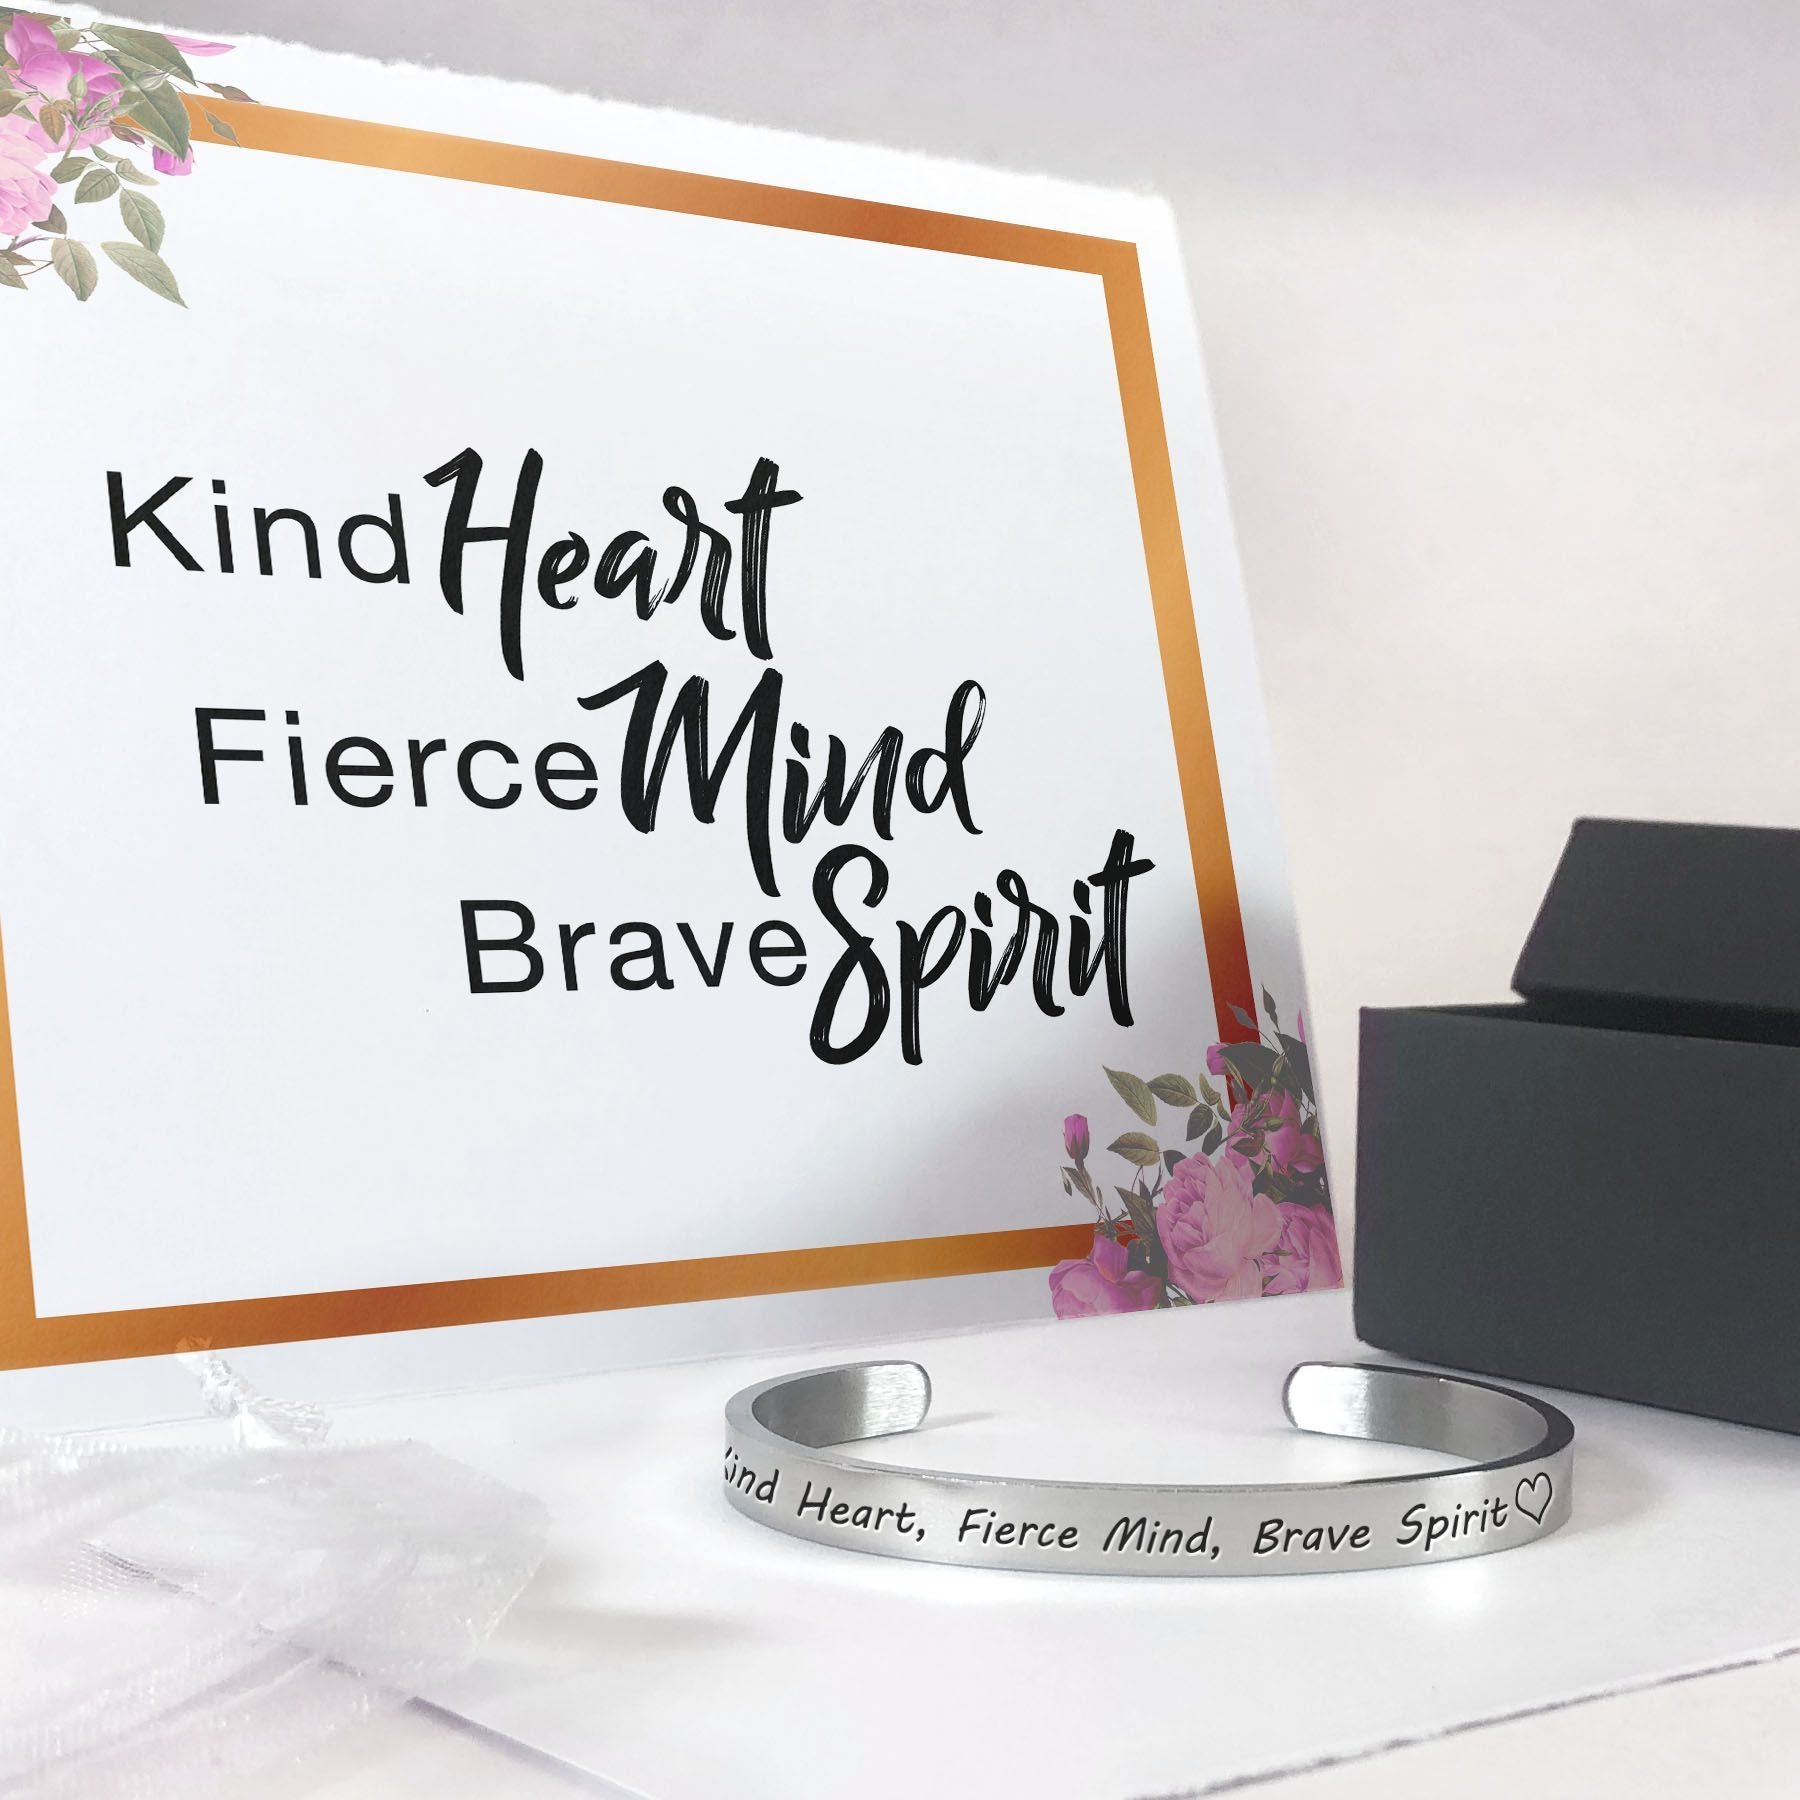 Kind heart, fierce mind, brave spirit bracelet with silver plating in front of a gift box with bag and gift card in the background